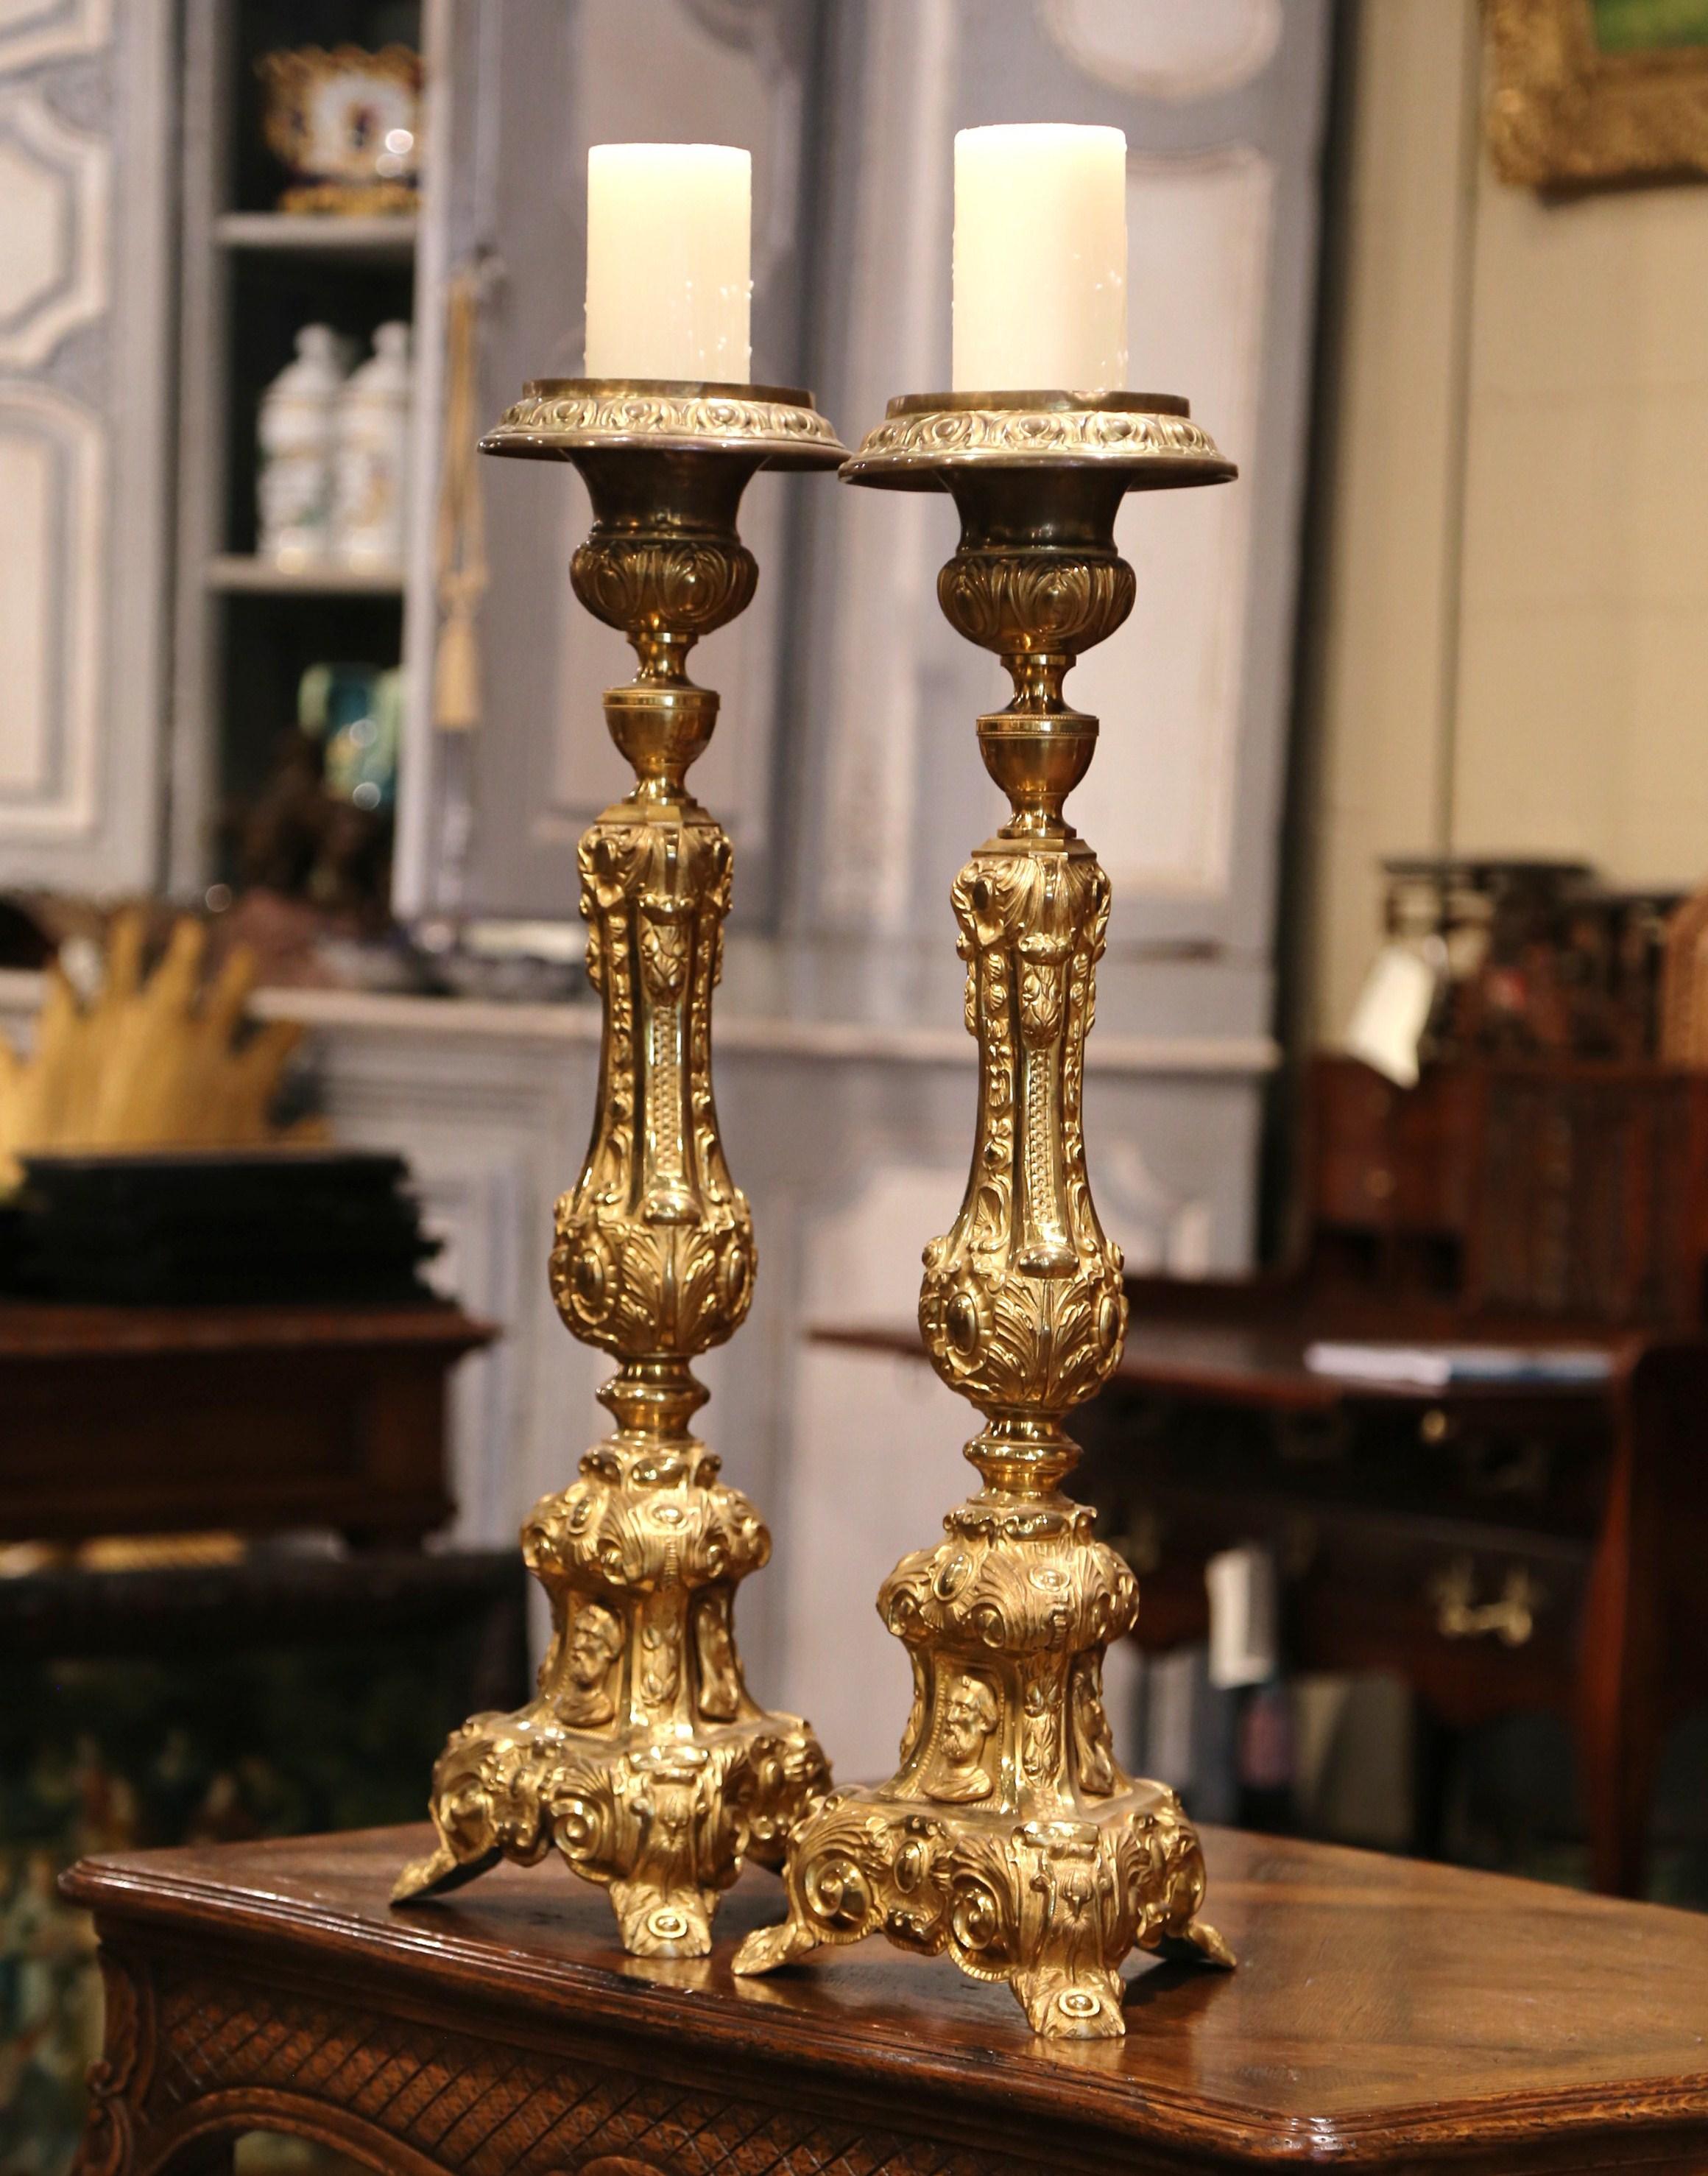 These brass candlesticks were found in a private chapel near Lyon, France. Crafted circa 1860, each pricket sits on small curved feet with three sides embellished by repousse decor. Both tall candleholders have three religious medallions with God,